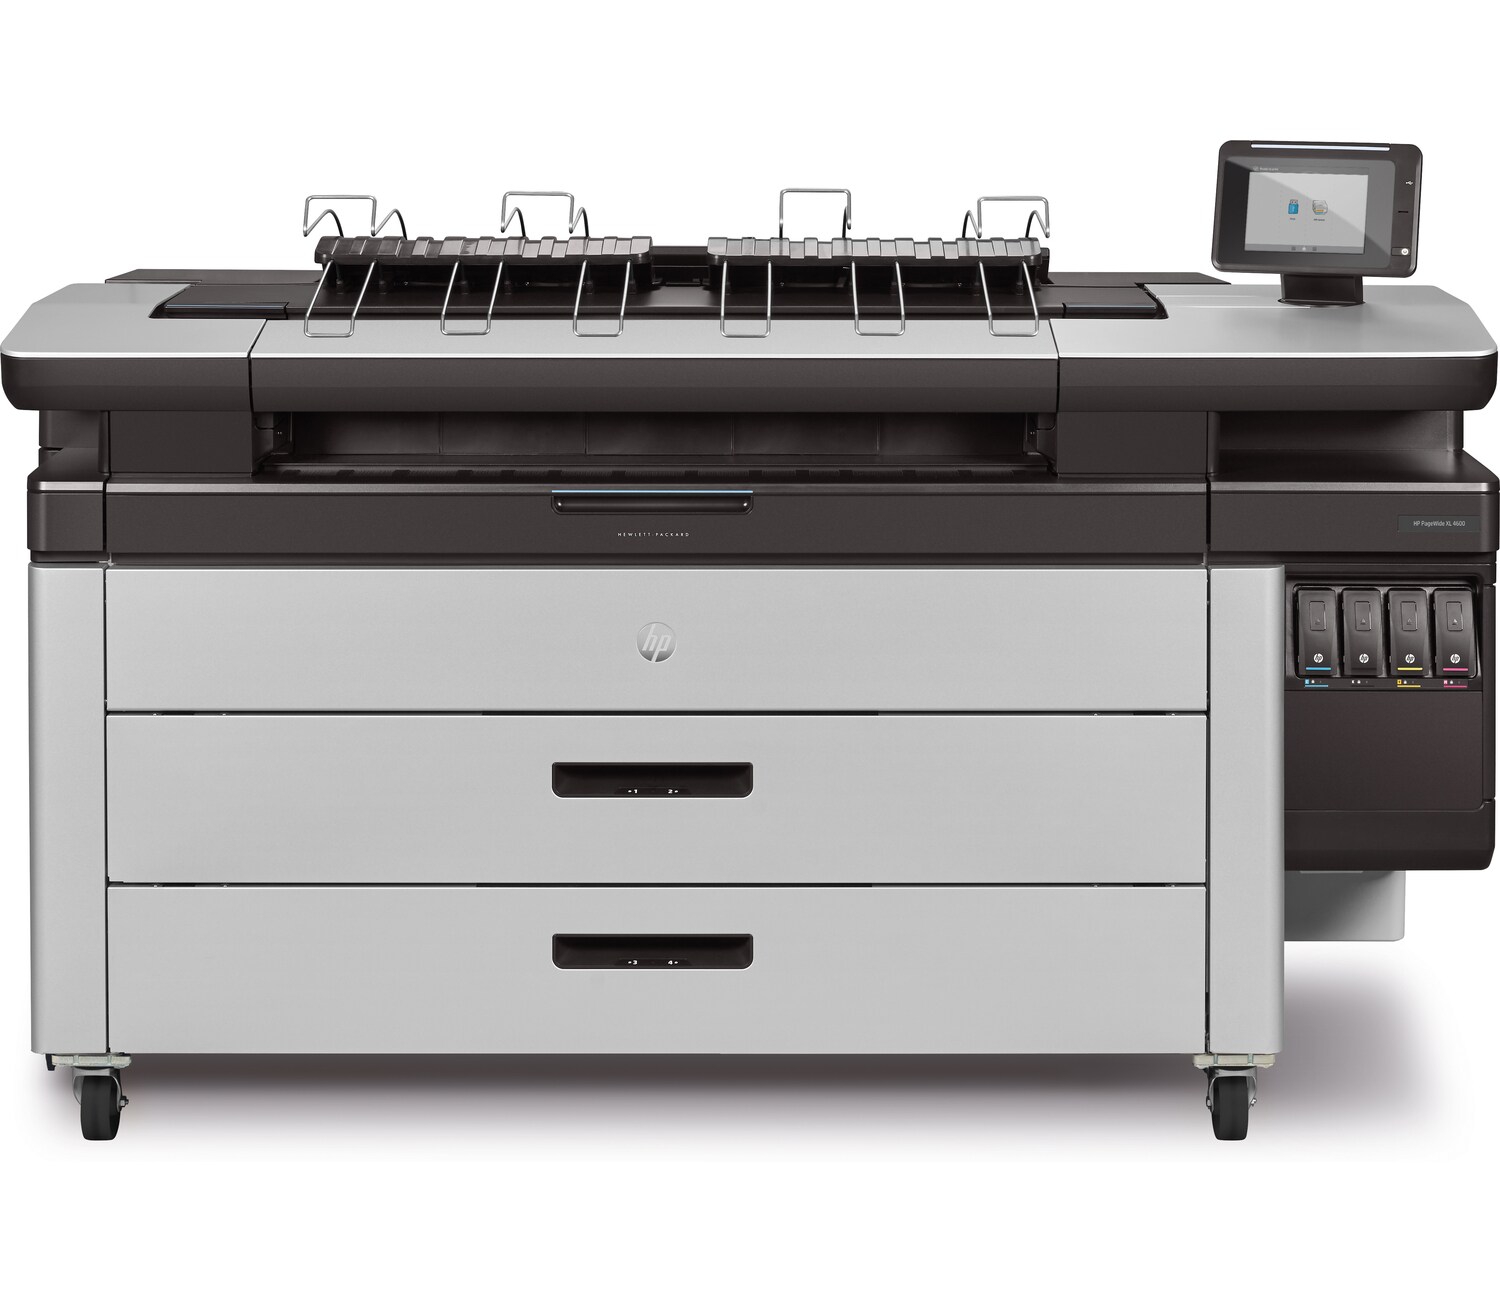 HP PageWideXL 4600 Printer (RS313A)